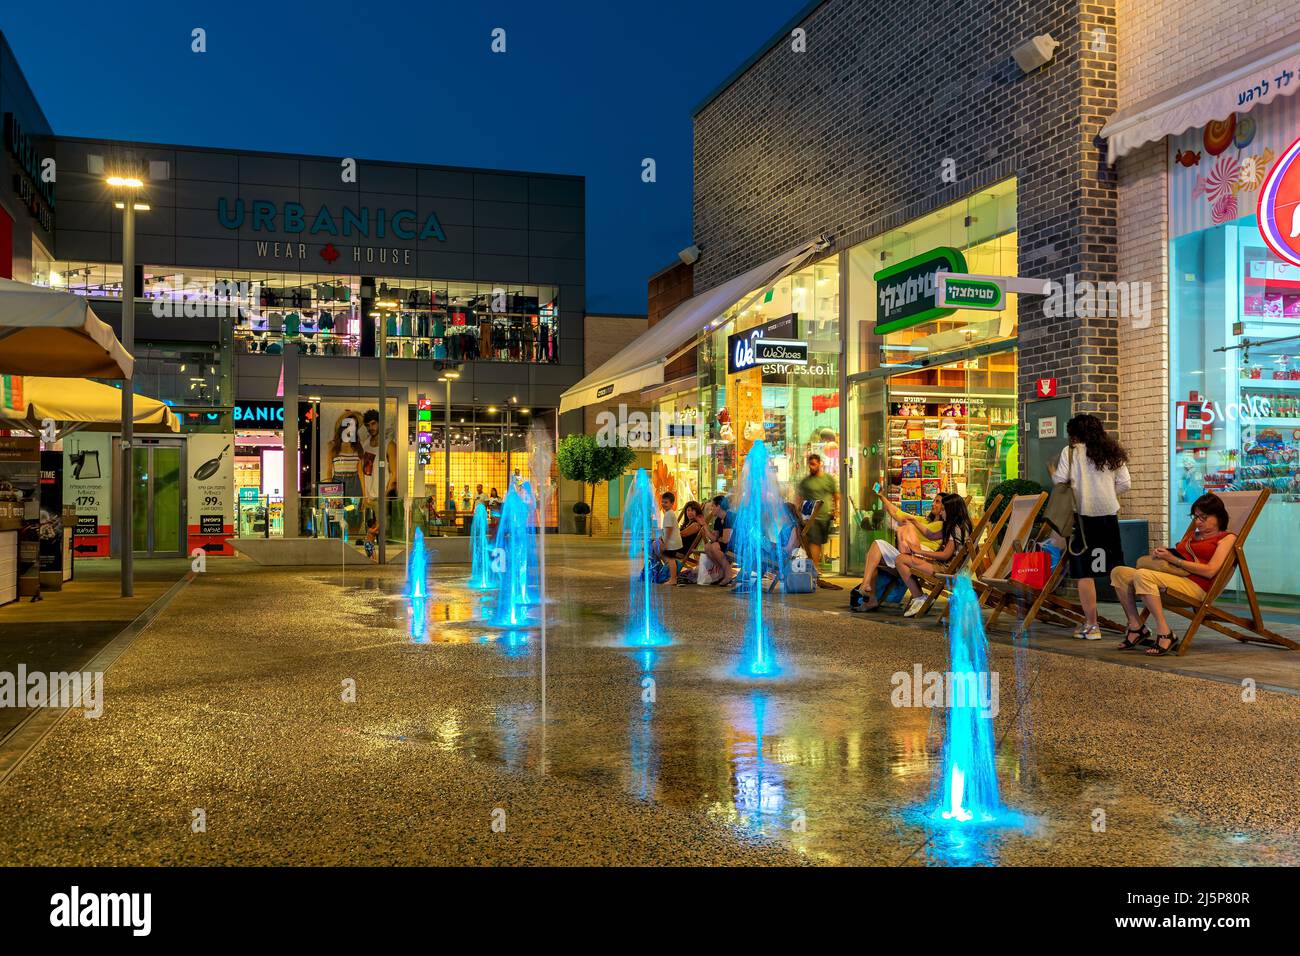 Shops, retail stores and illuminated fountains in open air mall at evening in Ashdod, Israel. Stock Photo